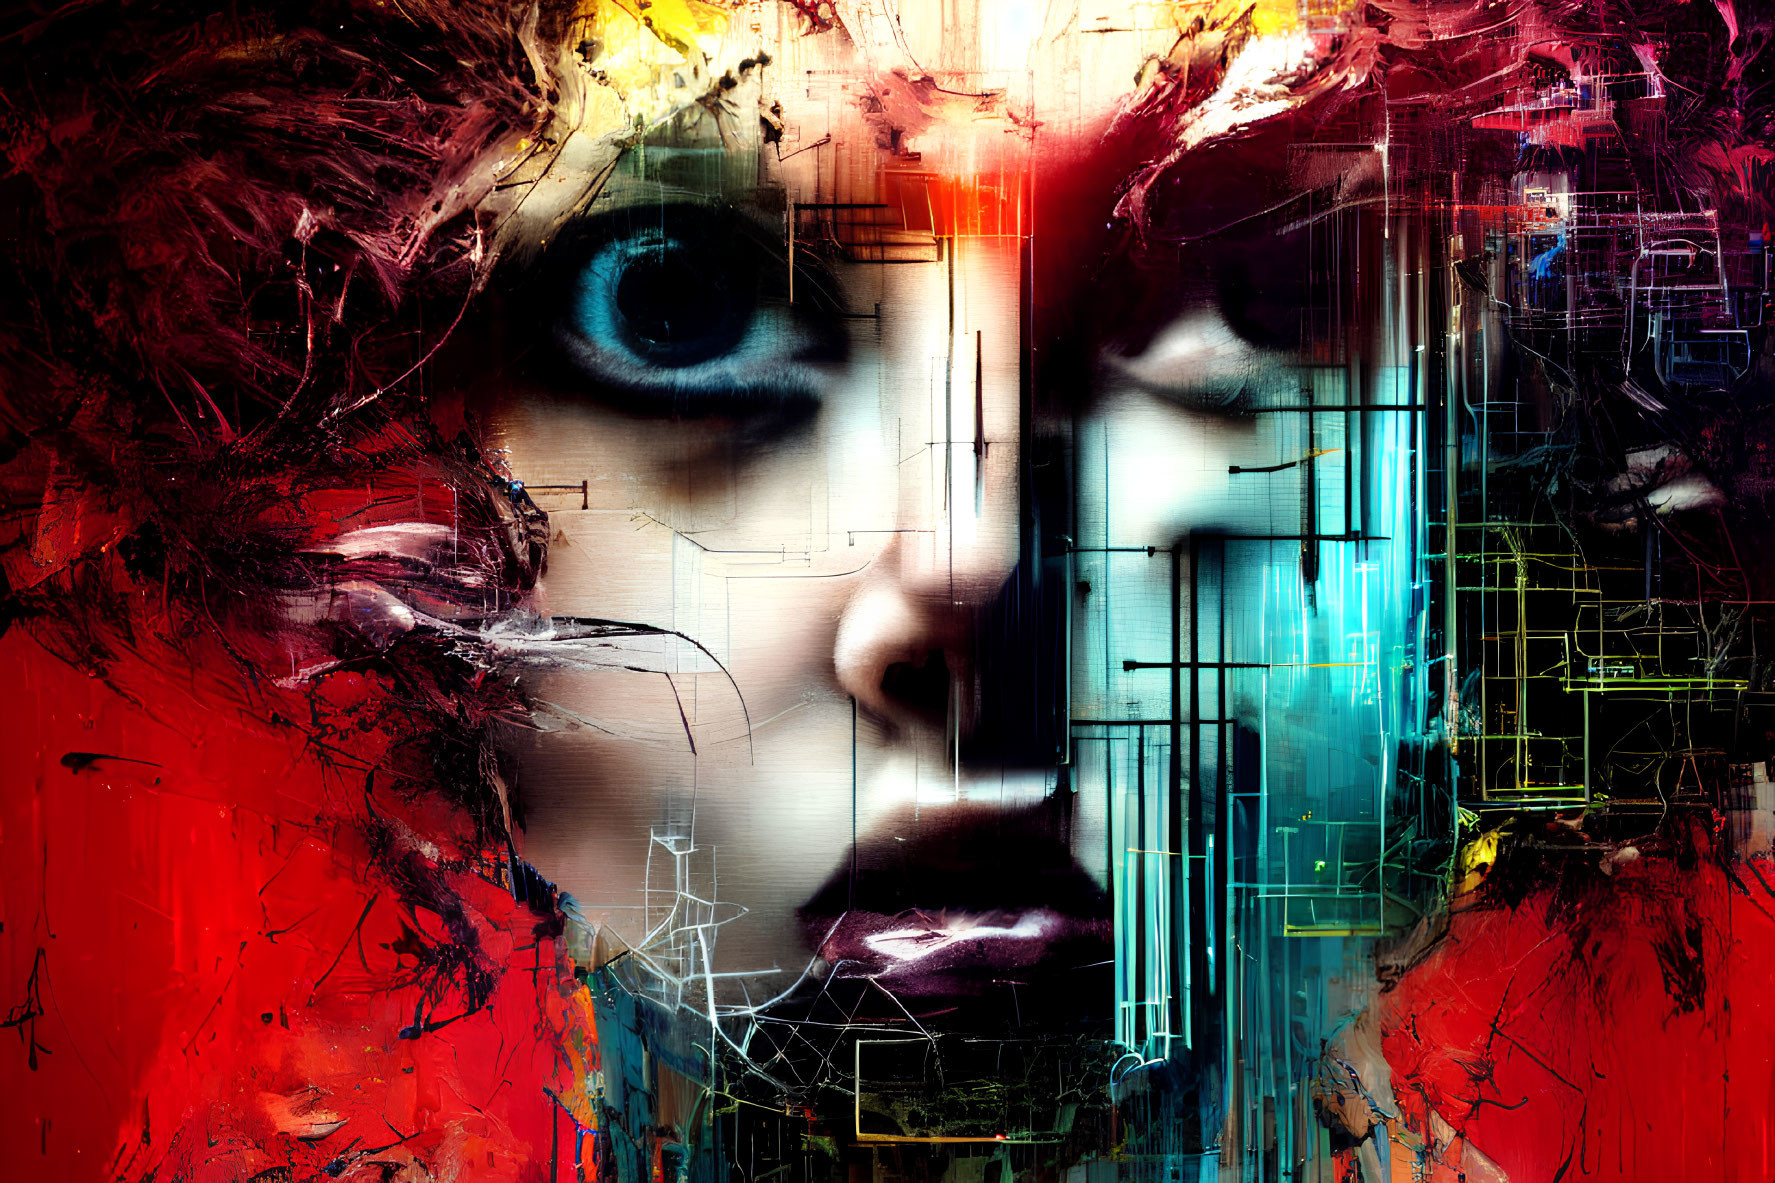 Colorful Abstract Digital Art: Woman's Face with Red, Blue, and Black Strokes